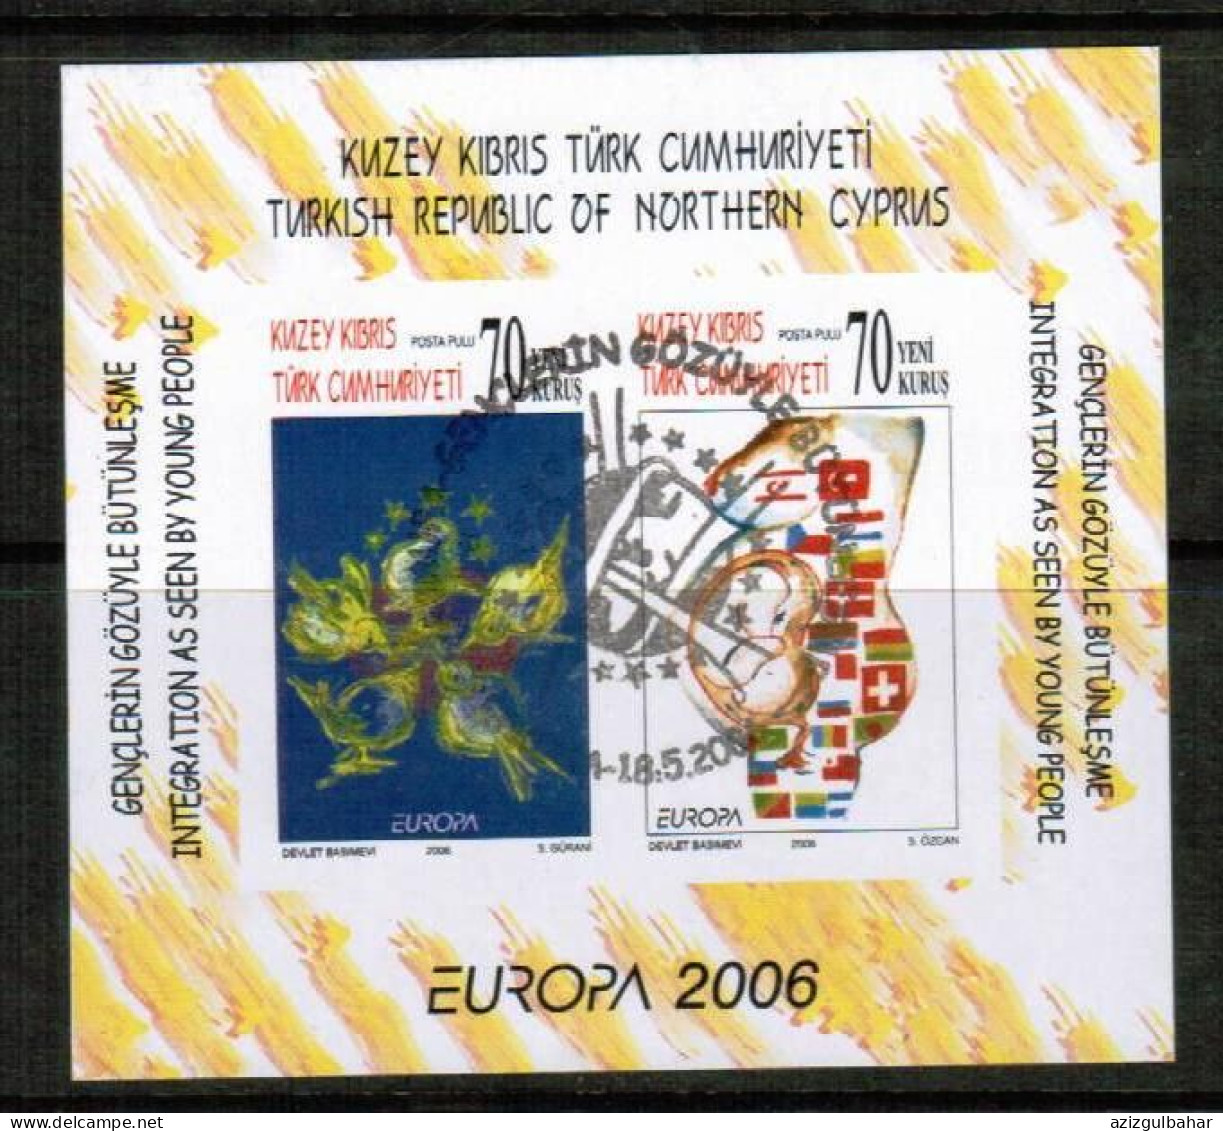 2006 - EUROPA  - INTEGRATION AS SEEN BY YOUR PEOPLE -  TURKISH CYPRIOT STAMPS - USED BLOCK - Gebruikt